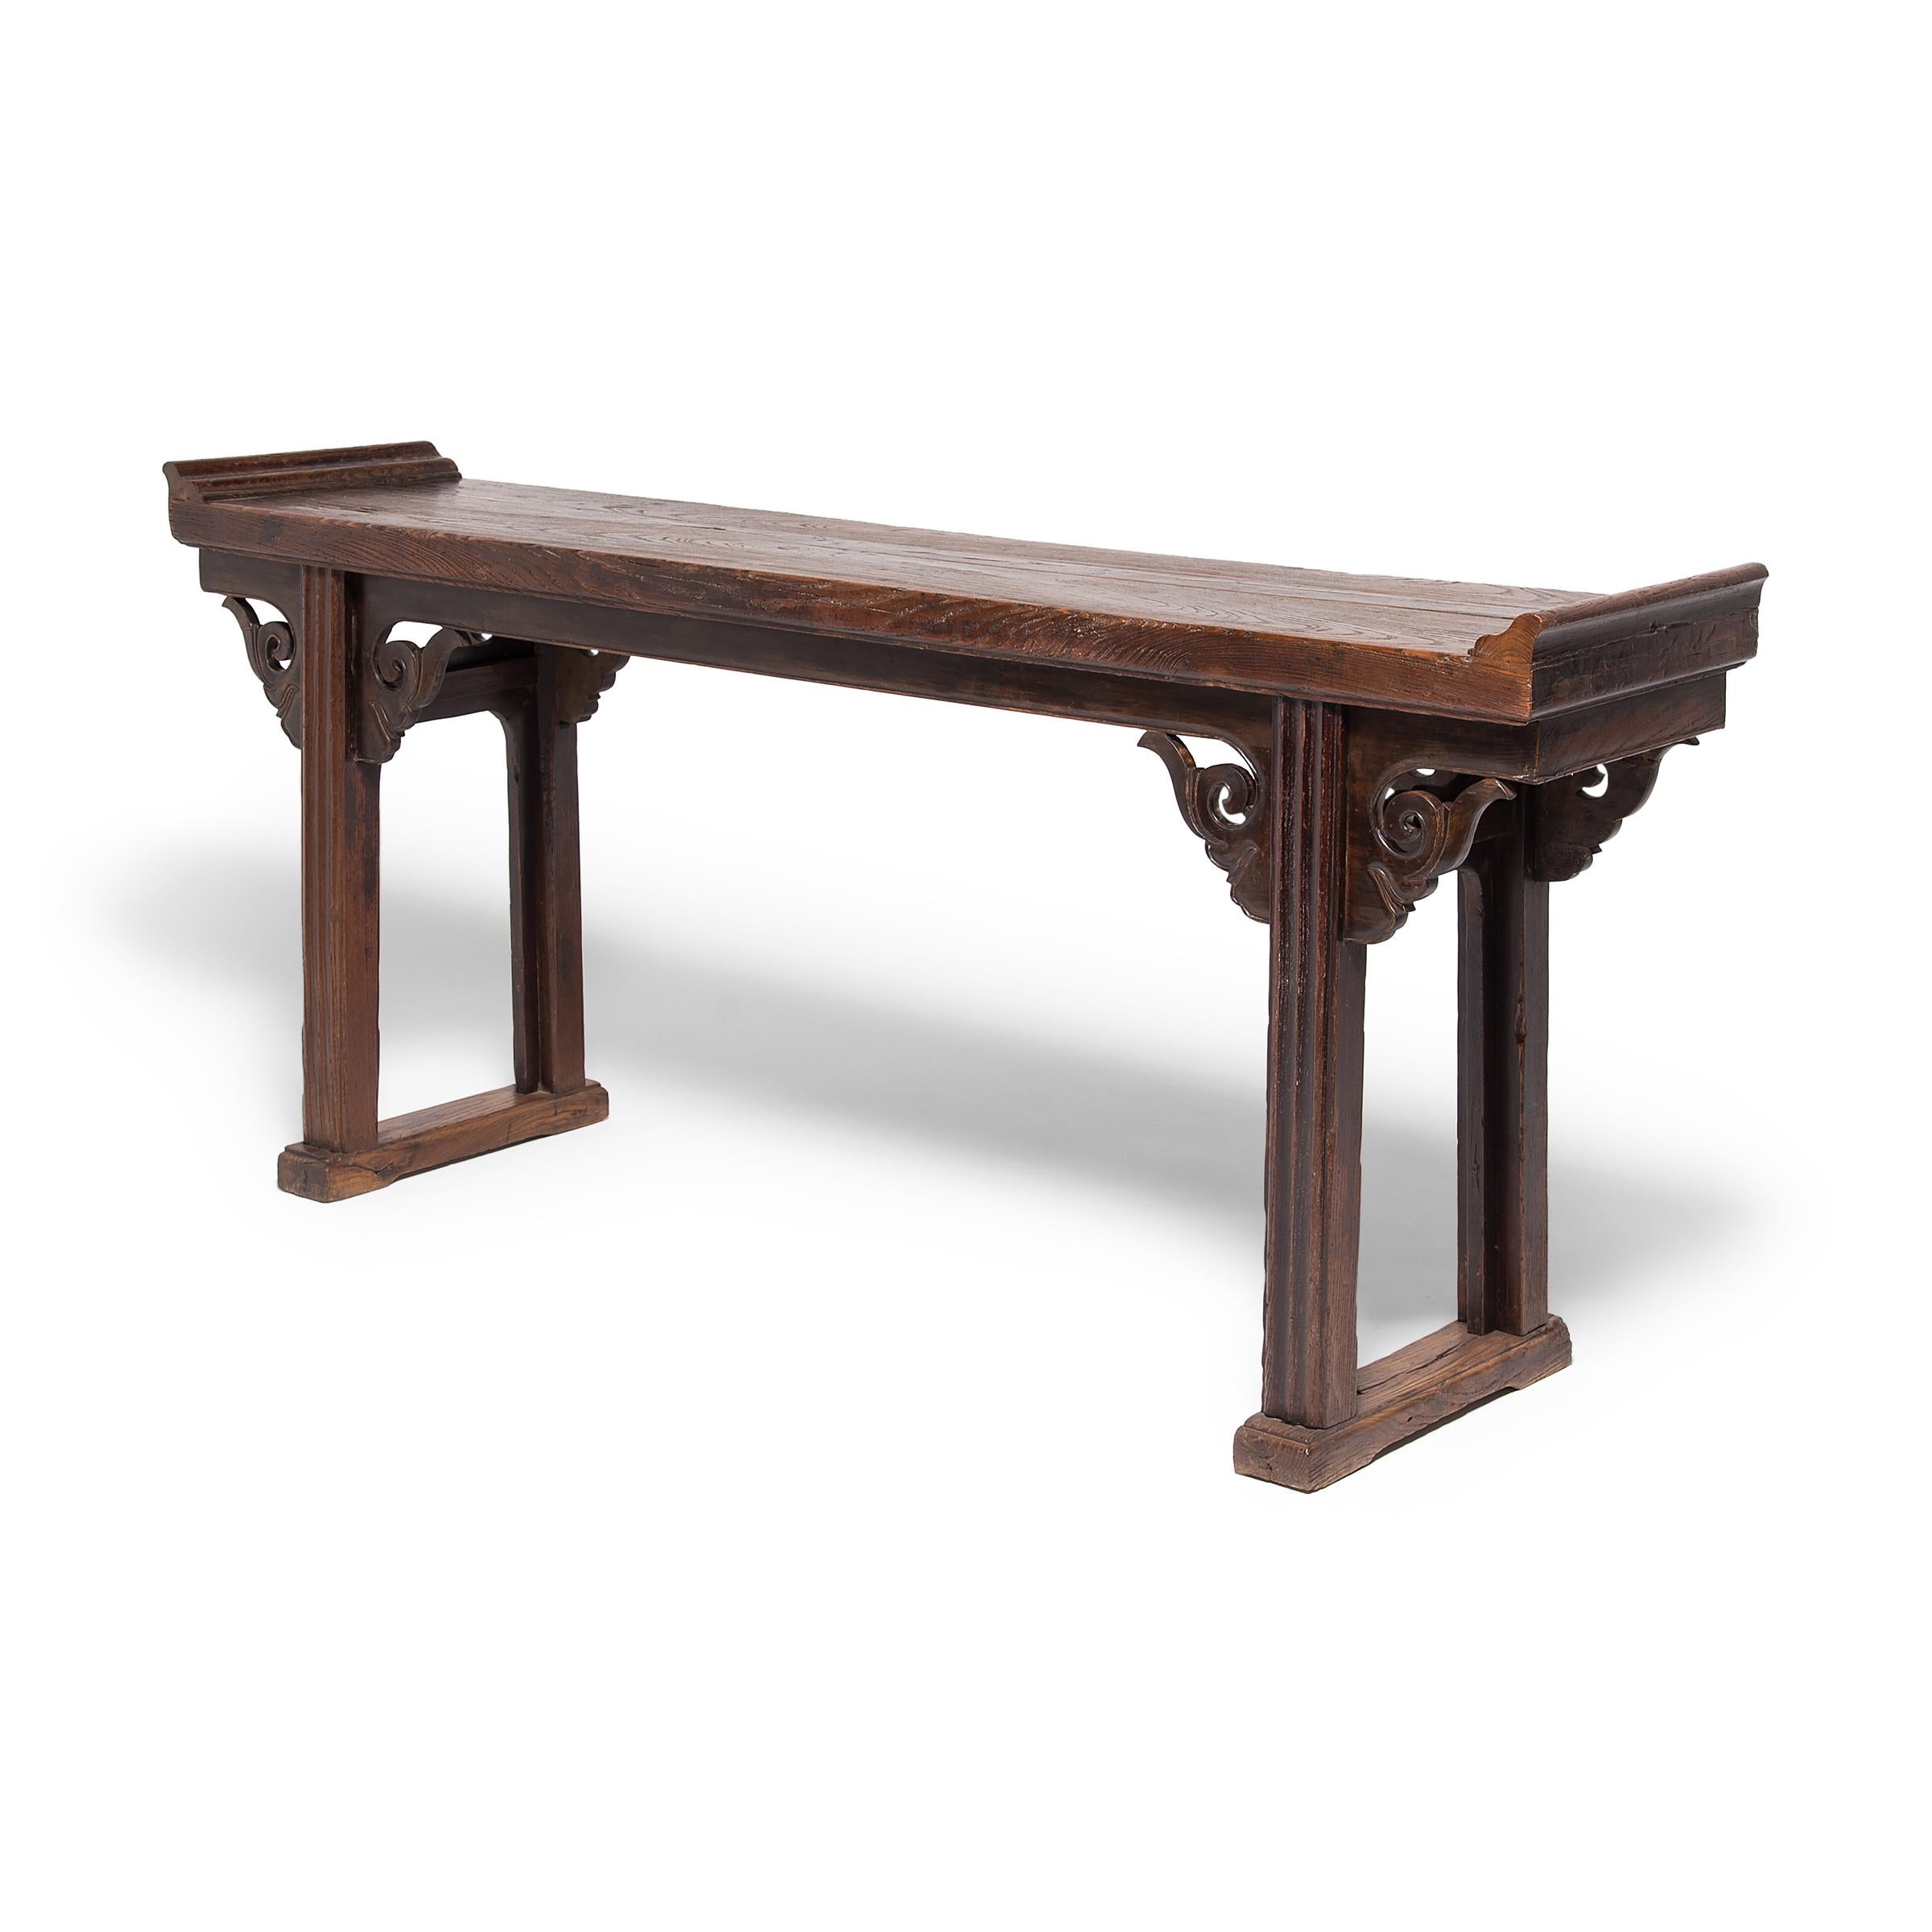 Qing Chinese Plank Top Console Table with Everted Ends, c. 1850